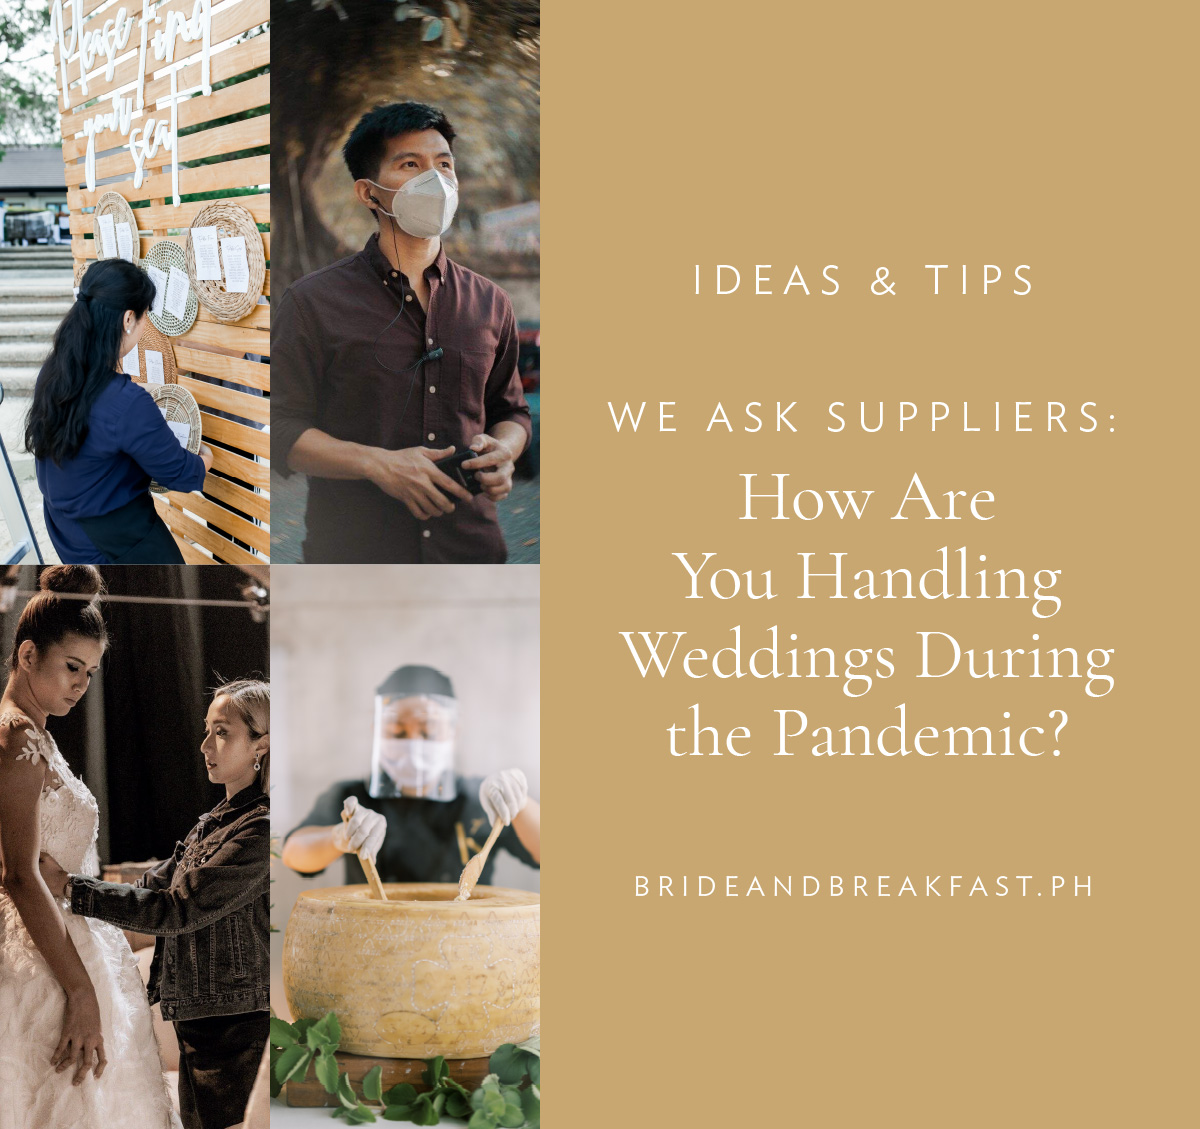 We Ask Suppliers: How Are You Handling Weddings During the Pandemic?